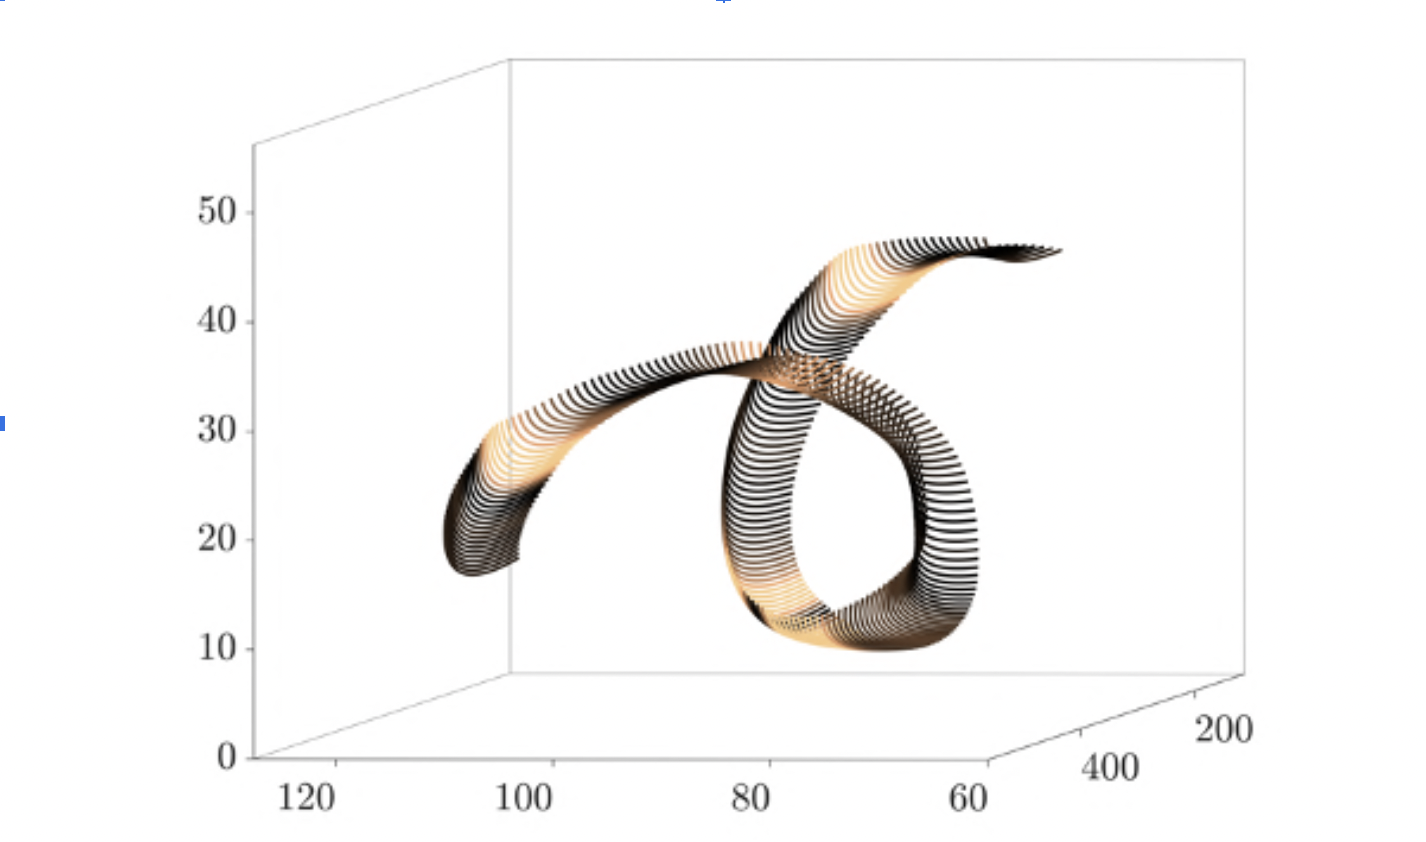 Figure 1: Measurement of a non-axisymmetric fibre travelling close to the wall of a turbulent channel flow, represented here by the grey surface. Front view is shown. Fibre is coloured according to the instantaneous tumbling rate ΩtΩt normalised by the mean value computed over the entire track |ΩtΩt| (From M. Alipour, M. De Paoli, and A. Soldati (2022) “Influence of Reynolds number on the dynamics of long non-axisymmetric fibers in channel flow turbulence”, J. Fluid Mech. 934, A18-27.)